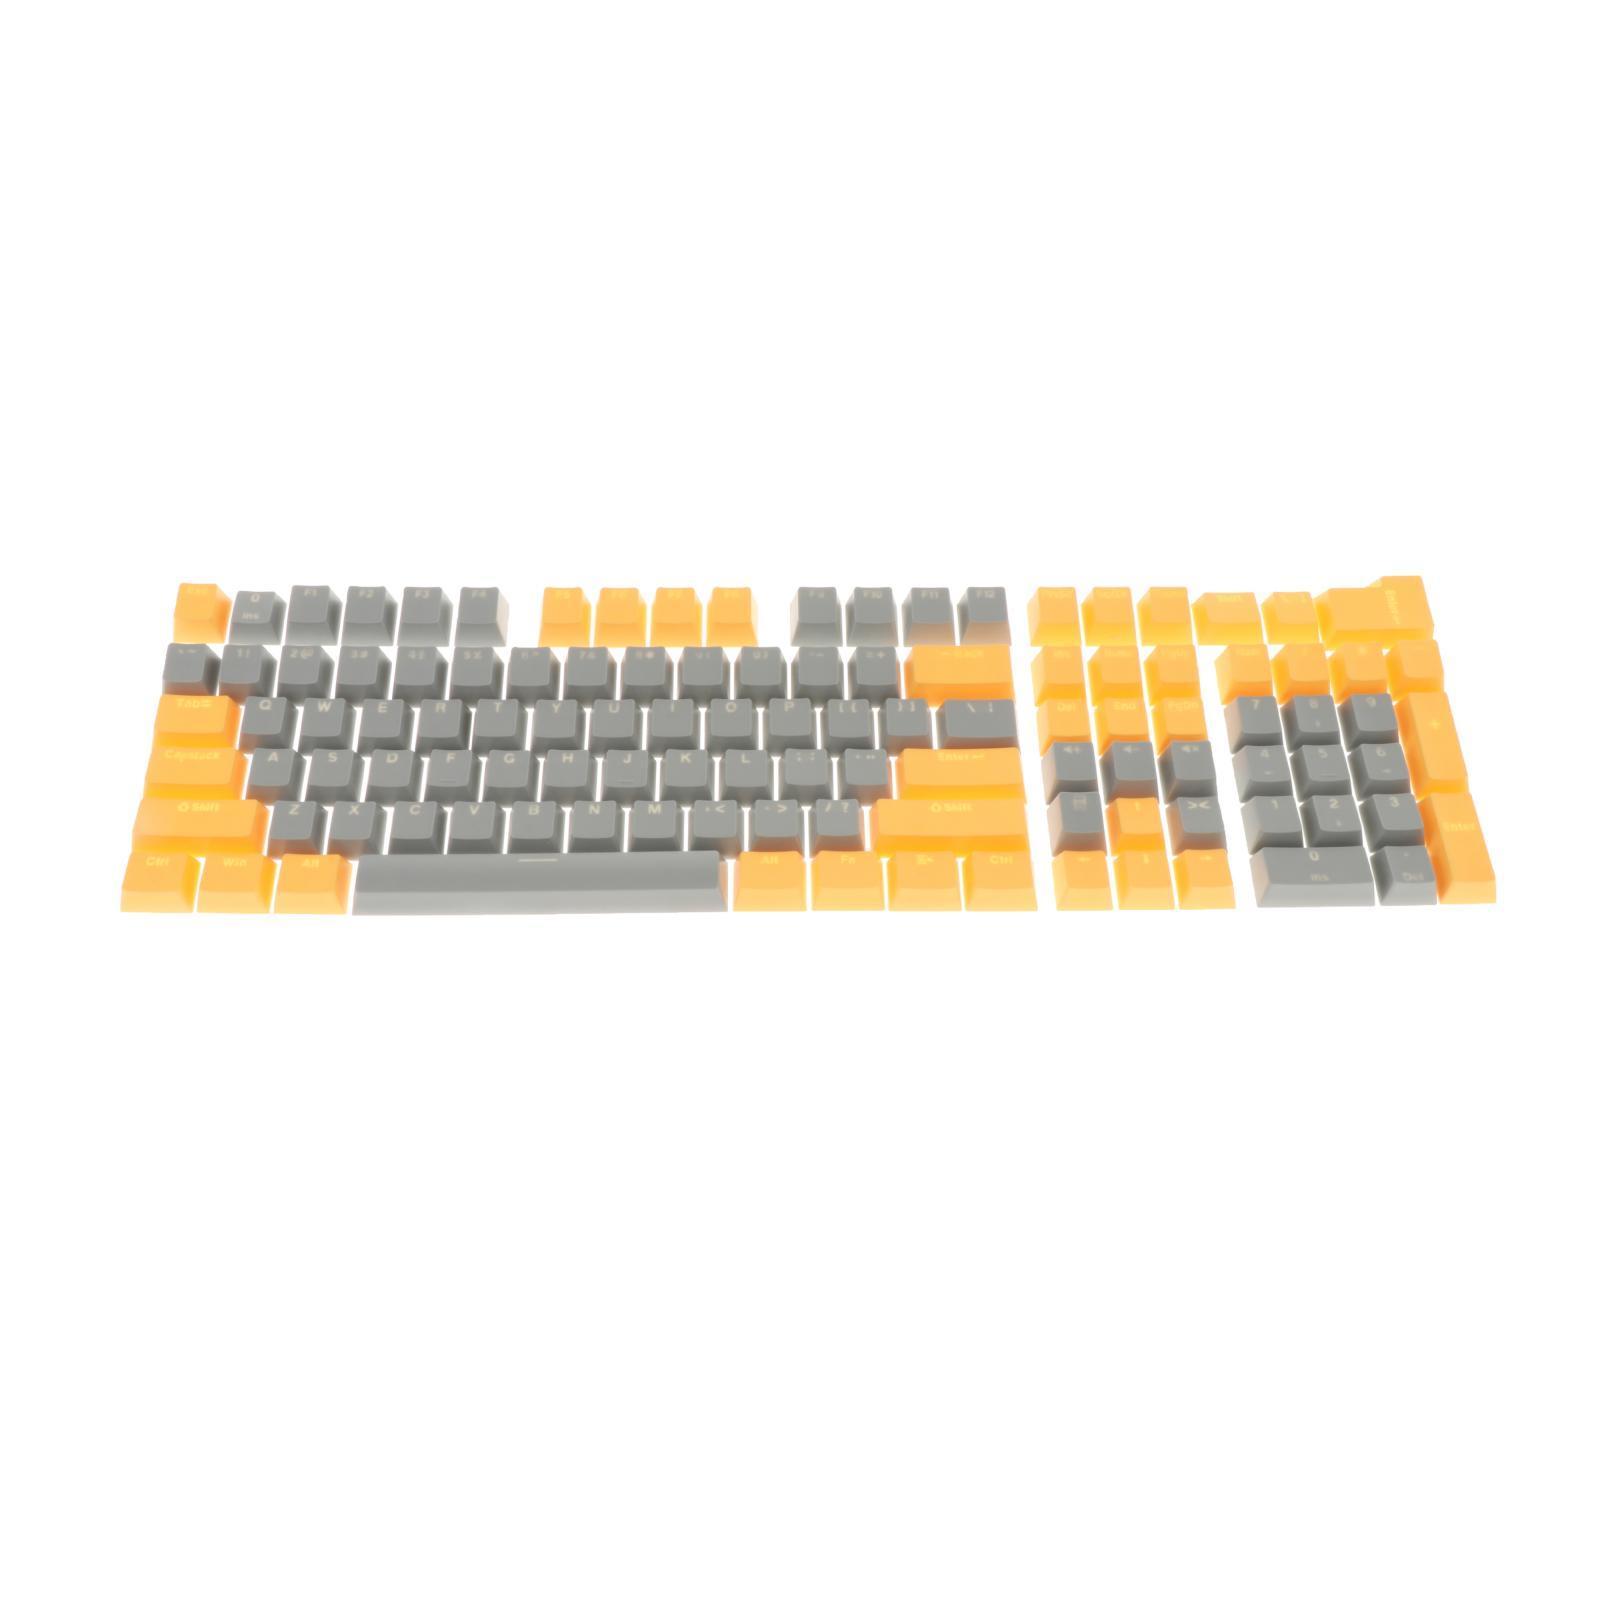 Backlit Two Color Key Caps Keycaps Set, Accessory ,Professional, Easy Installation, 108 Pieces Keyboard Keycaps for Mechanical Keyboards 61 Keys